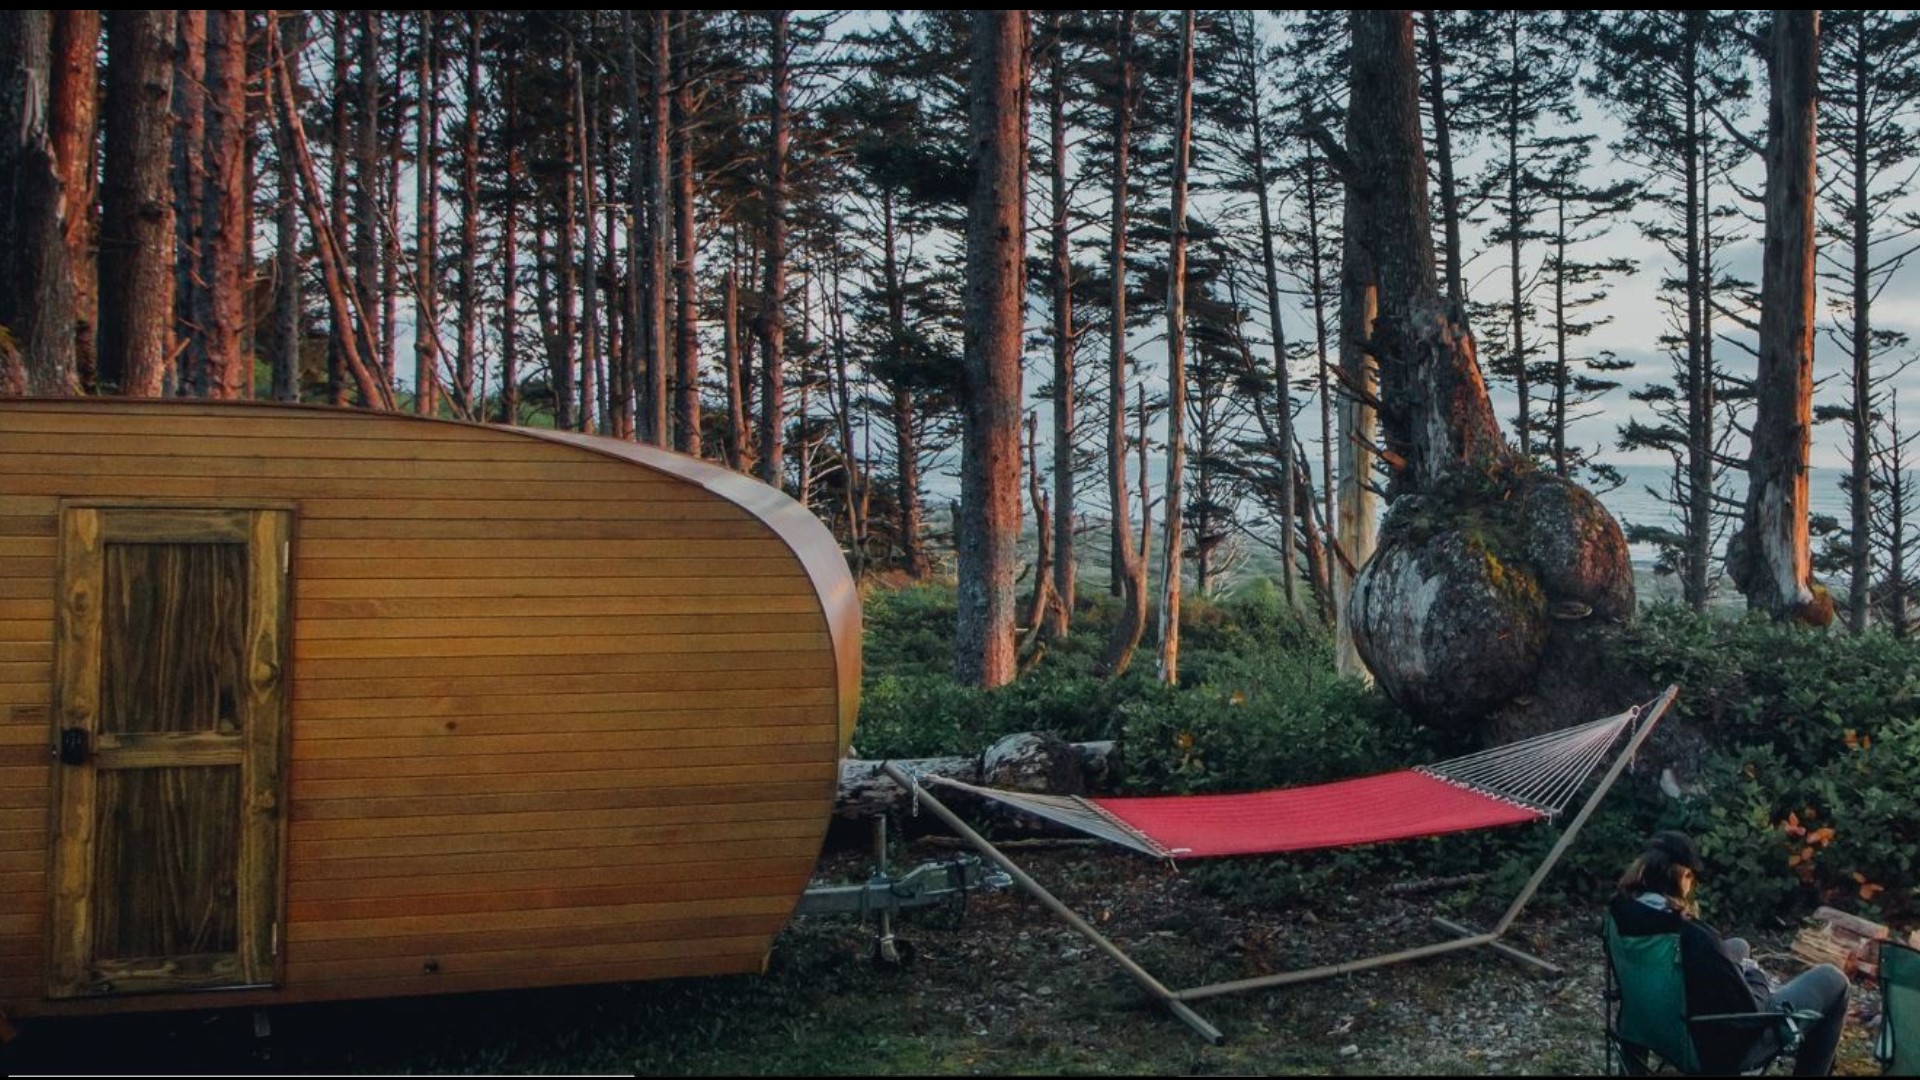 A new twist on a trailer park leaves no trace and gets people close to nature